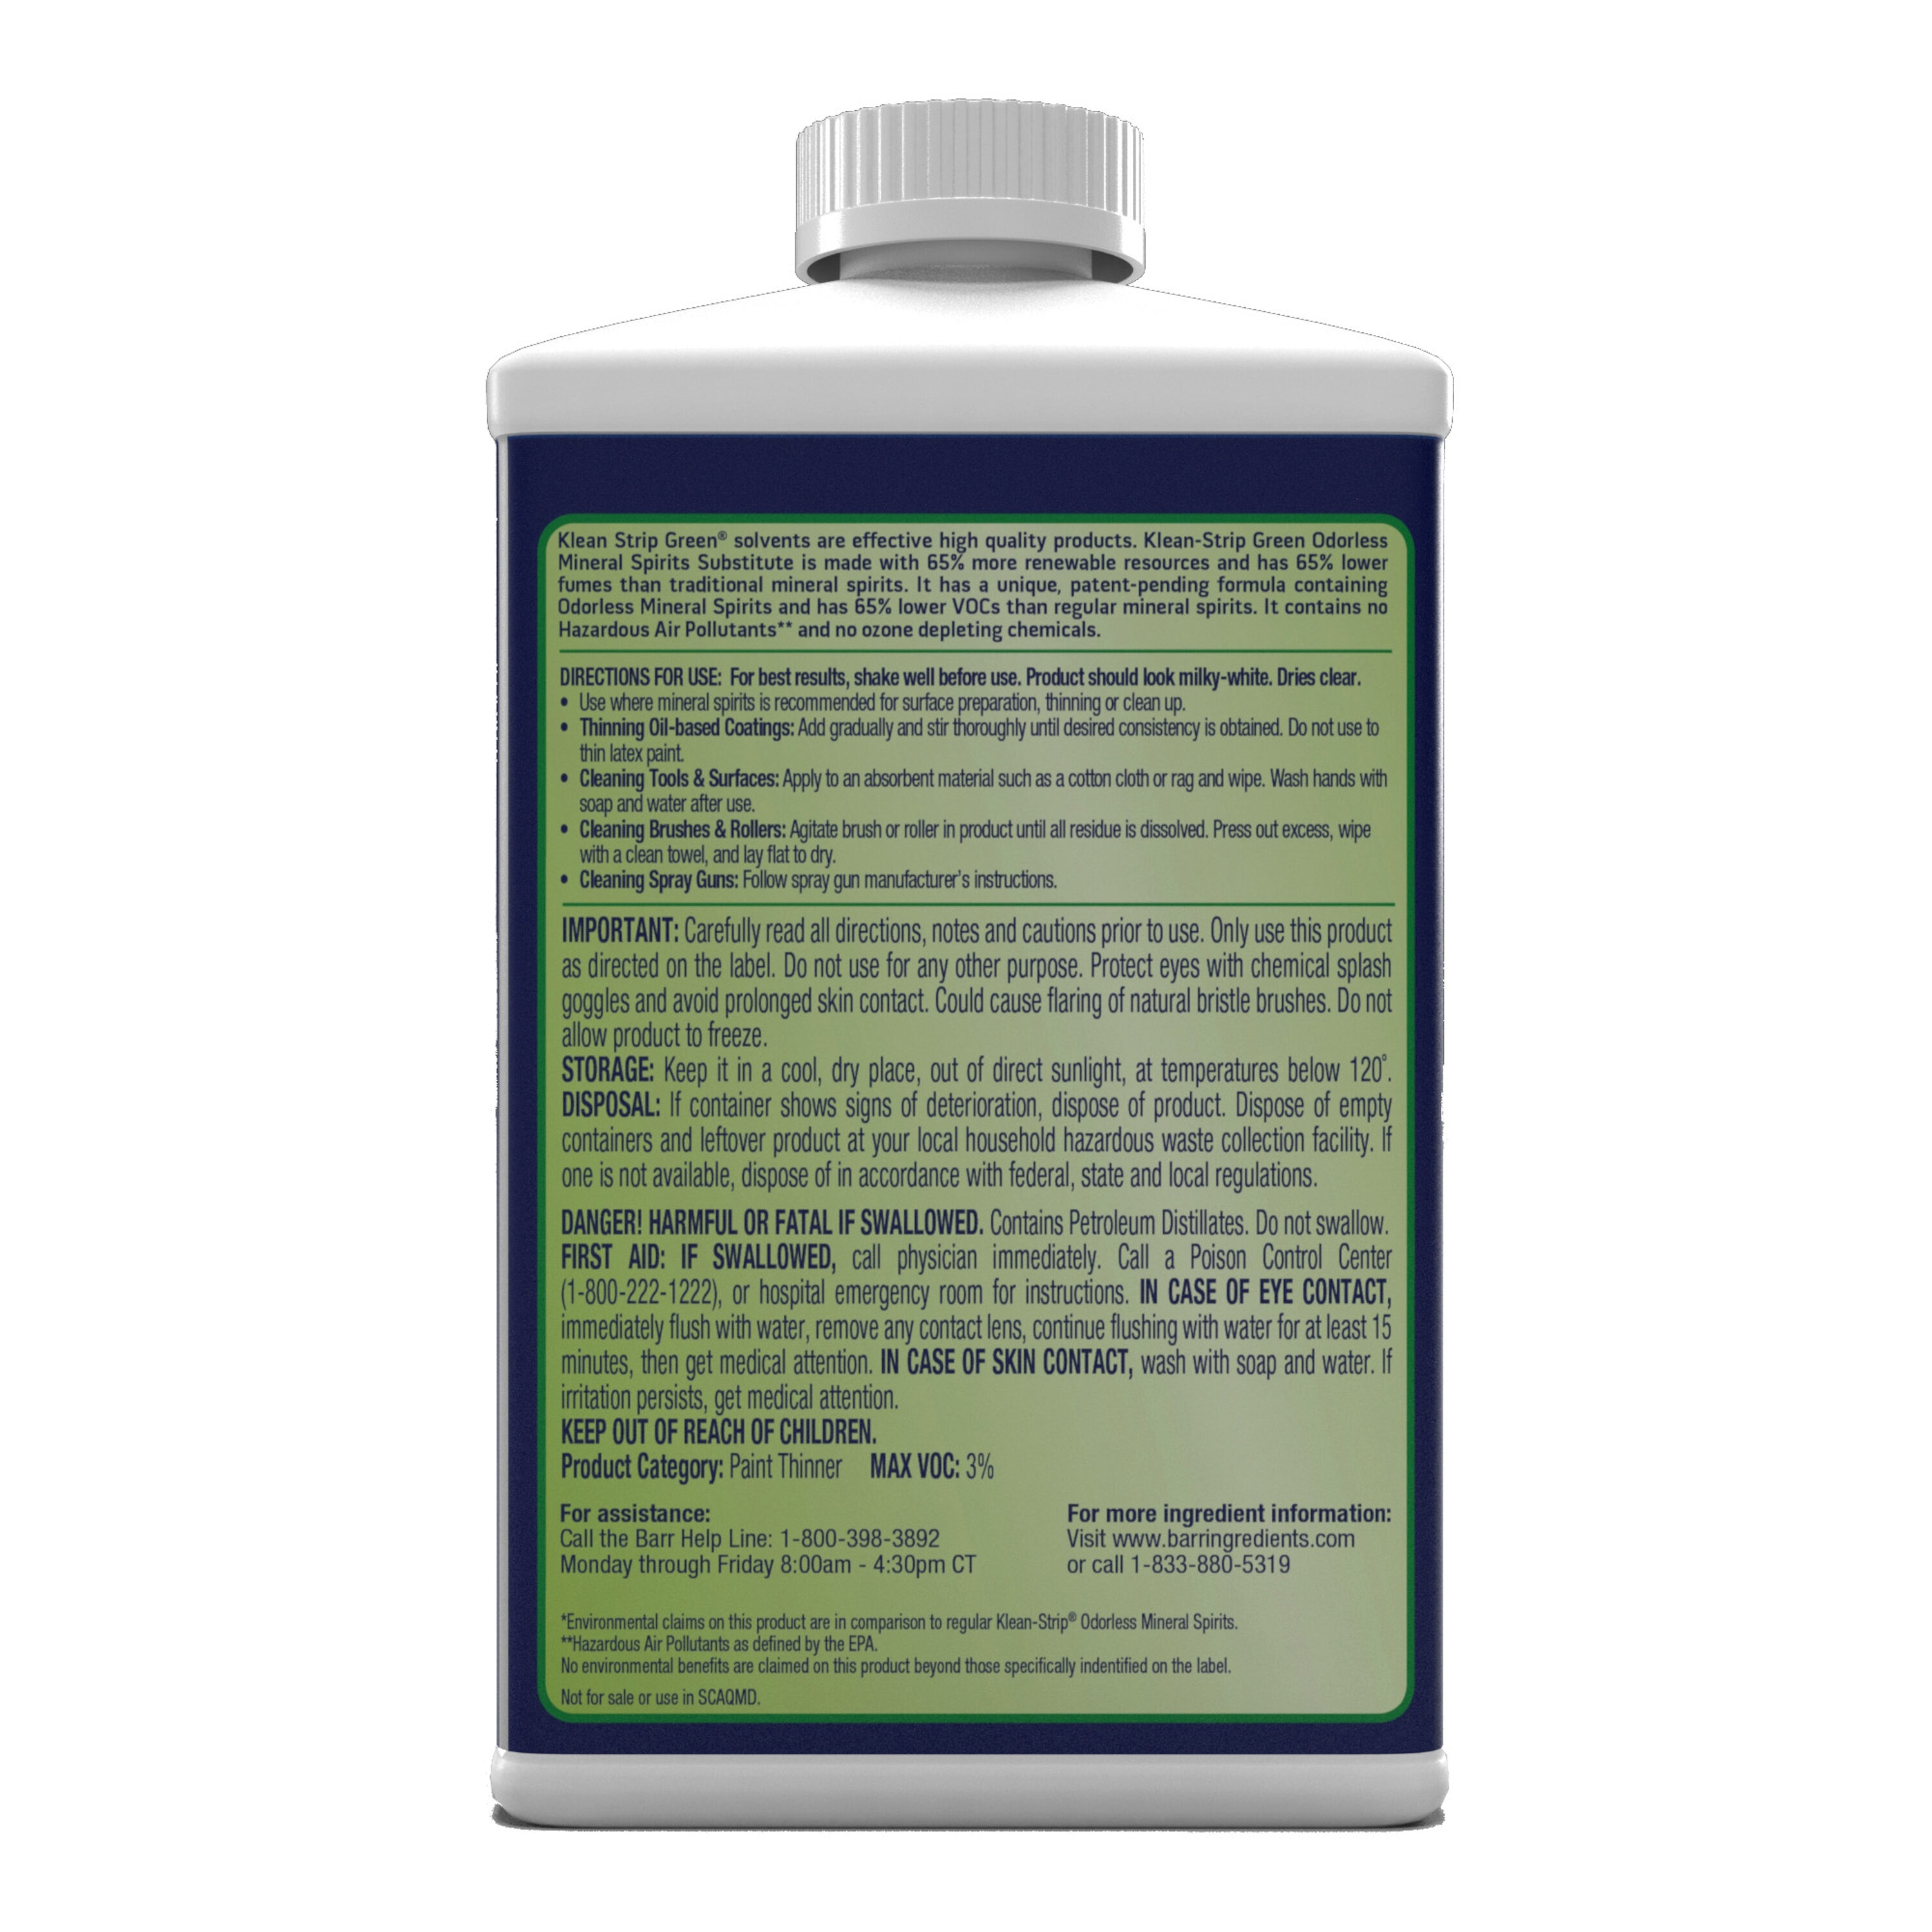 Jasco 32-fl oz Slow to dissolve Paint thinner in the Paint